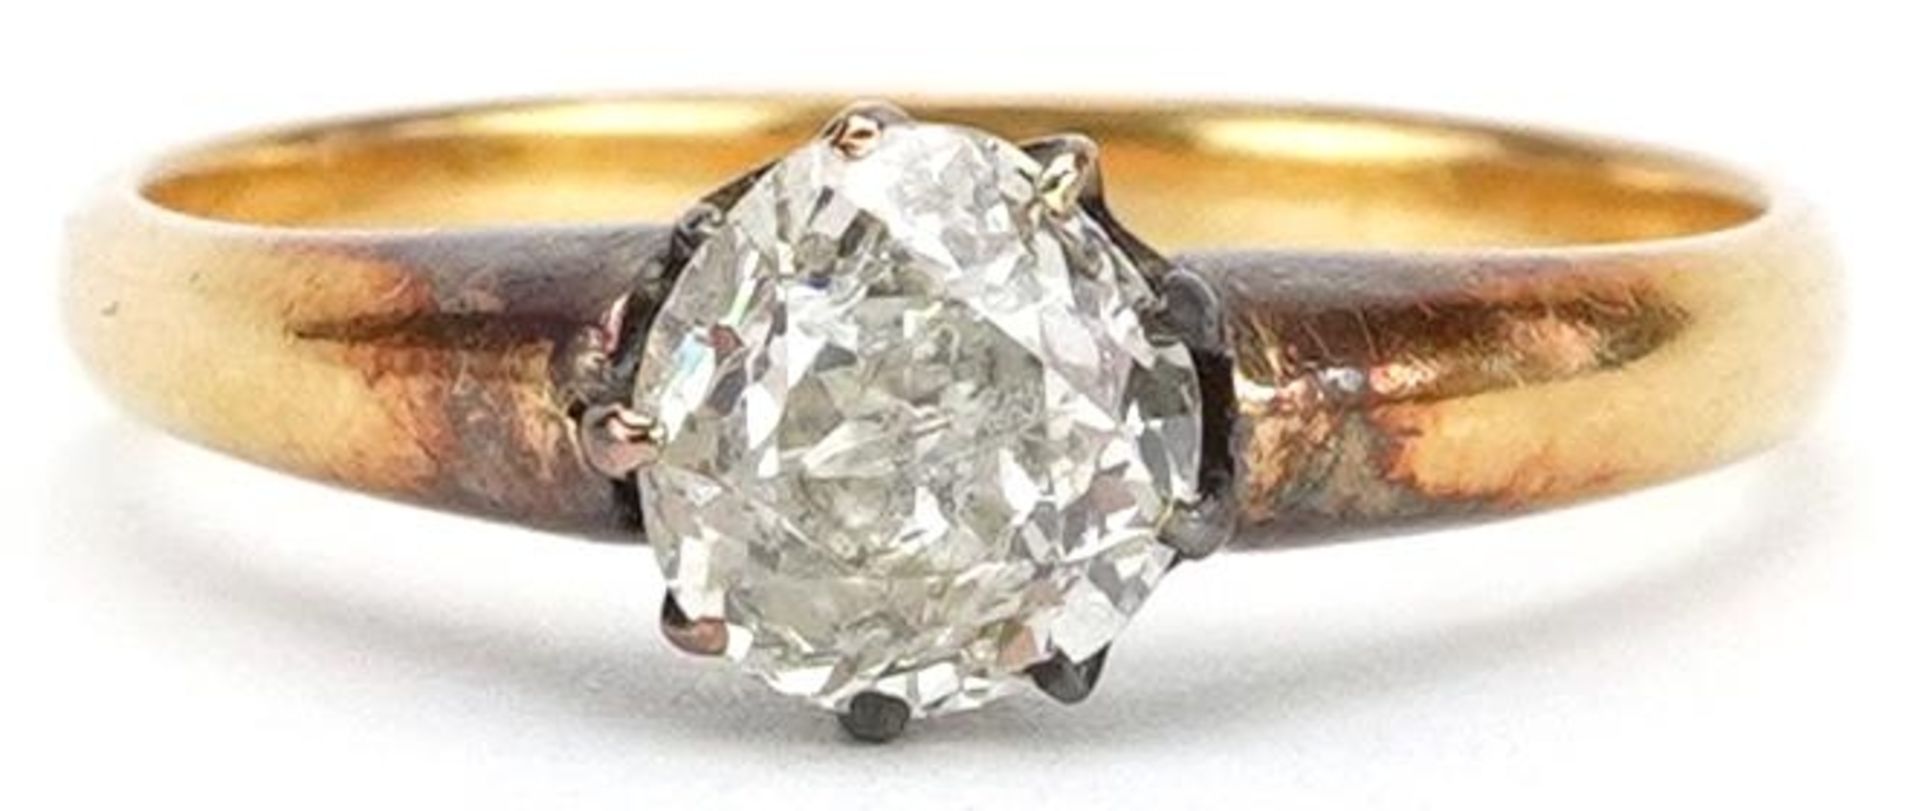 Unmarked gold diamond old wine cut diamond solitaire ring, tests as 18ct gold, approximately 1.12